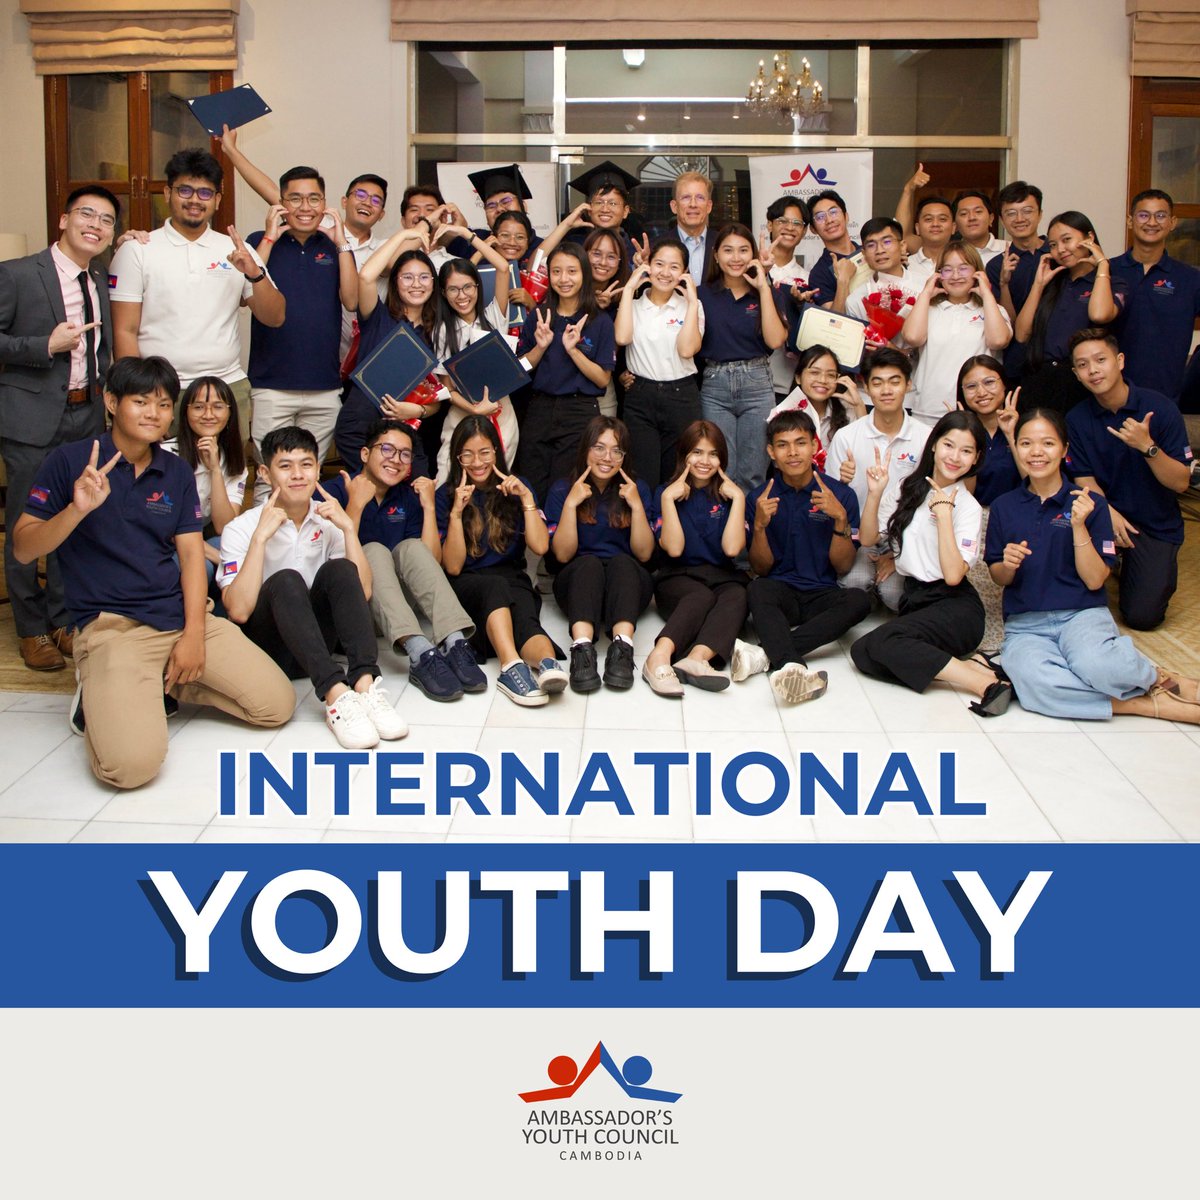 [International Youth Day] The U.S. Ambassador's Youth Council would like to appreciate Cambodian youth's unwavering commitment, dedication, and effort in promoting positive impacts despite diverse backgrounds and professions. #USAYCkh #InternationalYouthDay